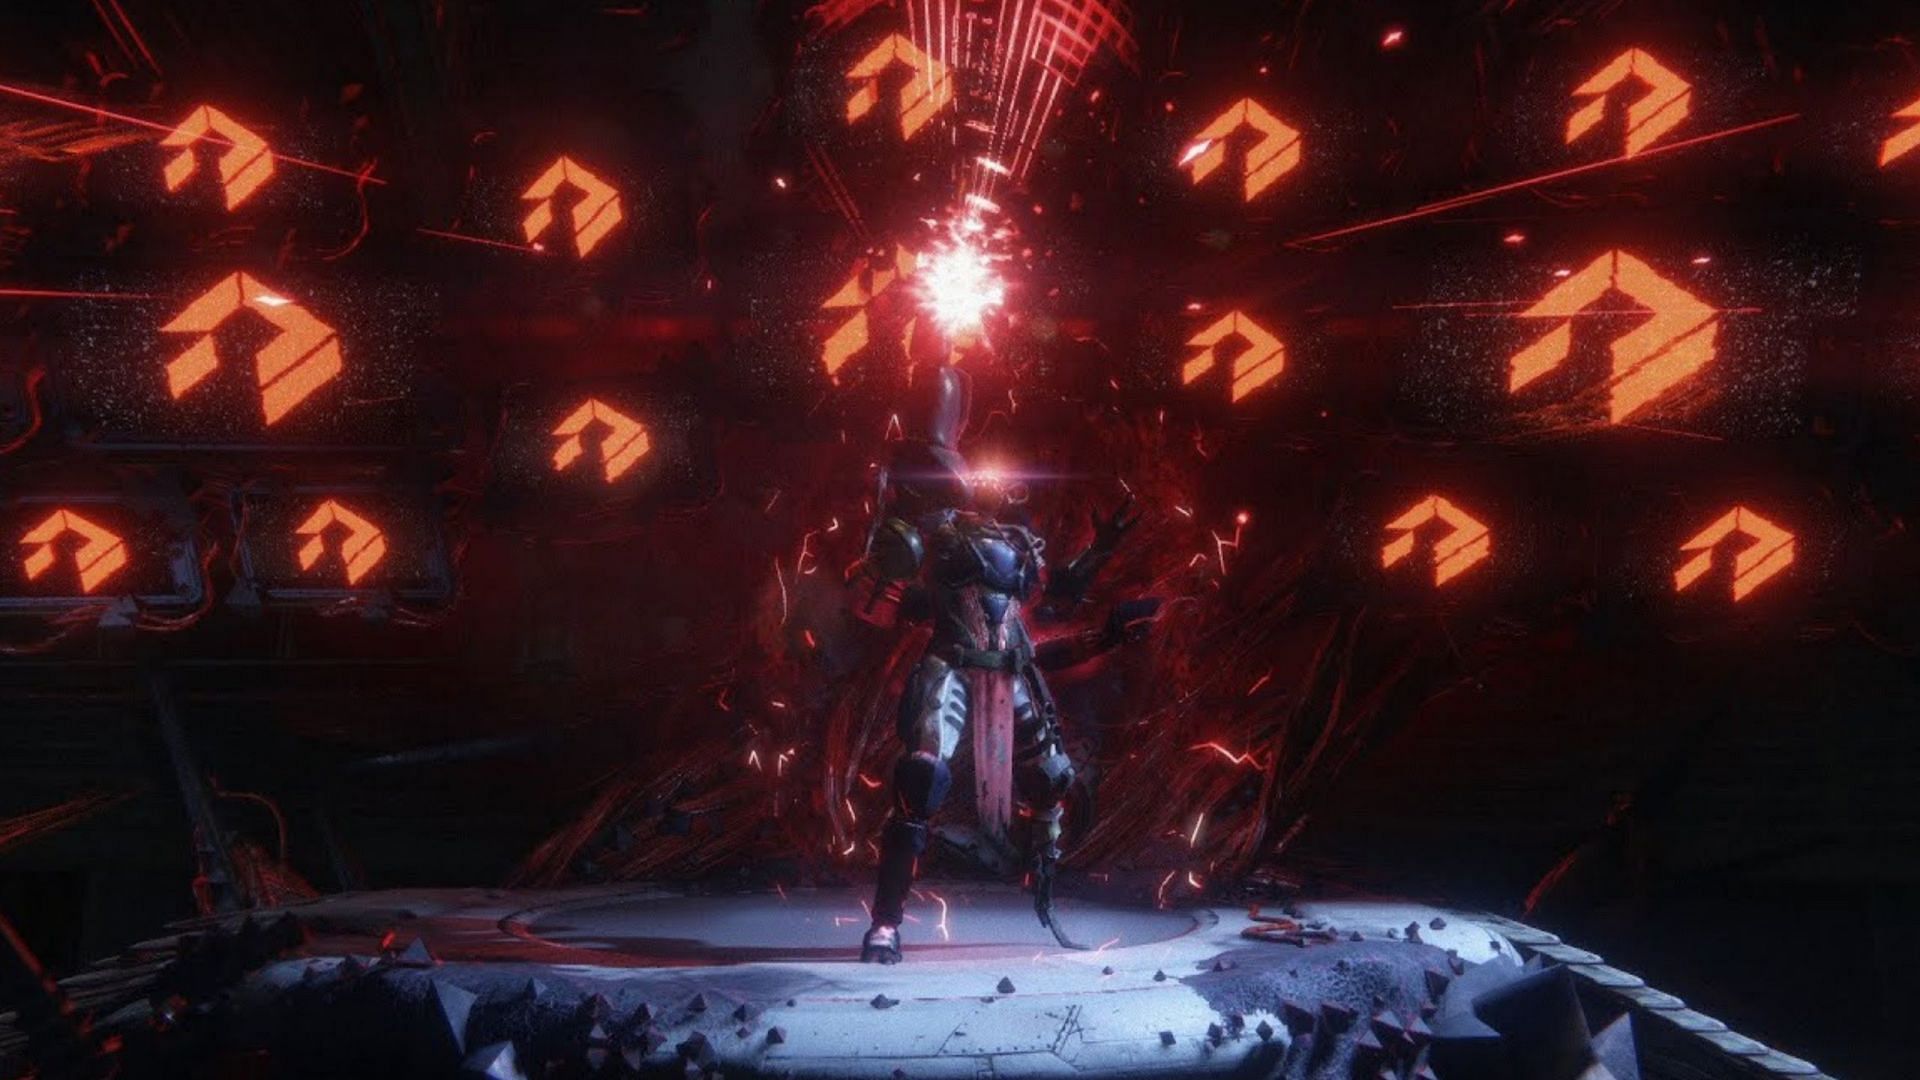 Wrath of the Machine final boss from Destiny 1 